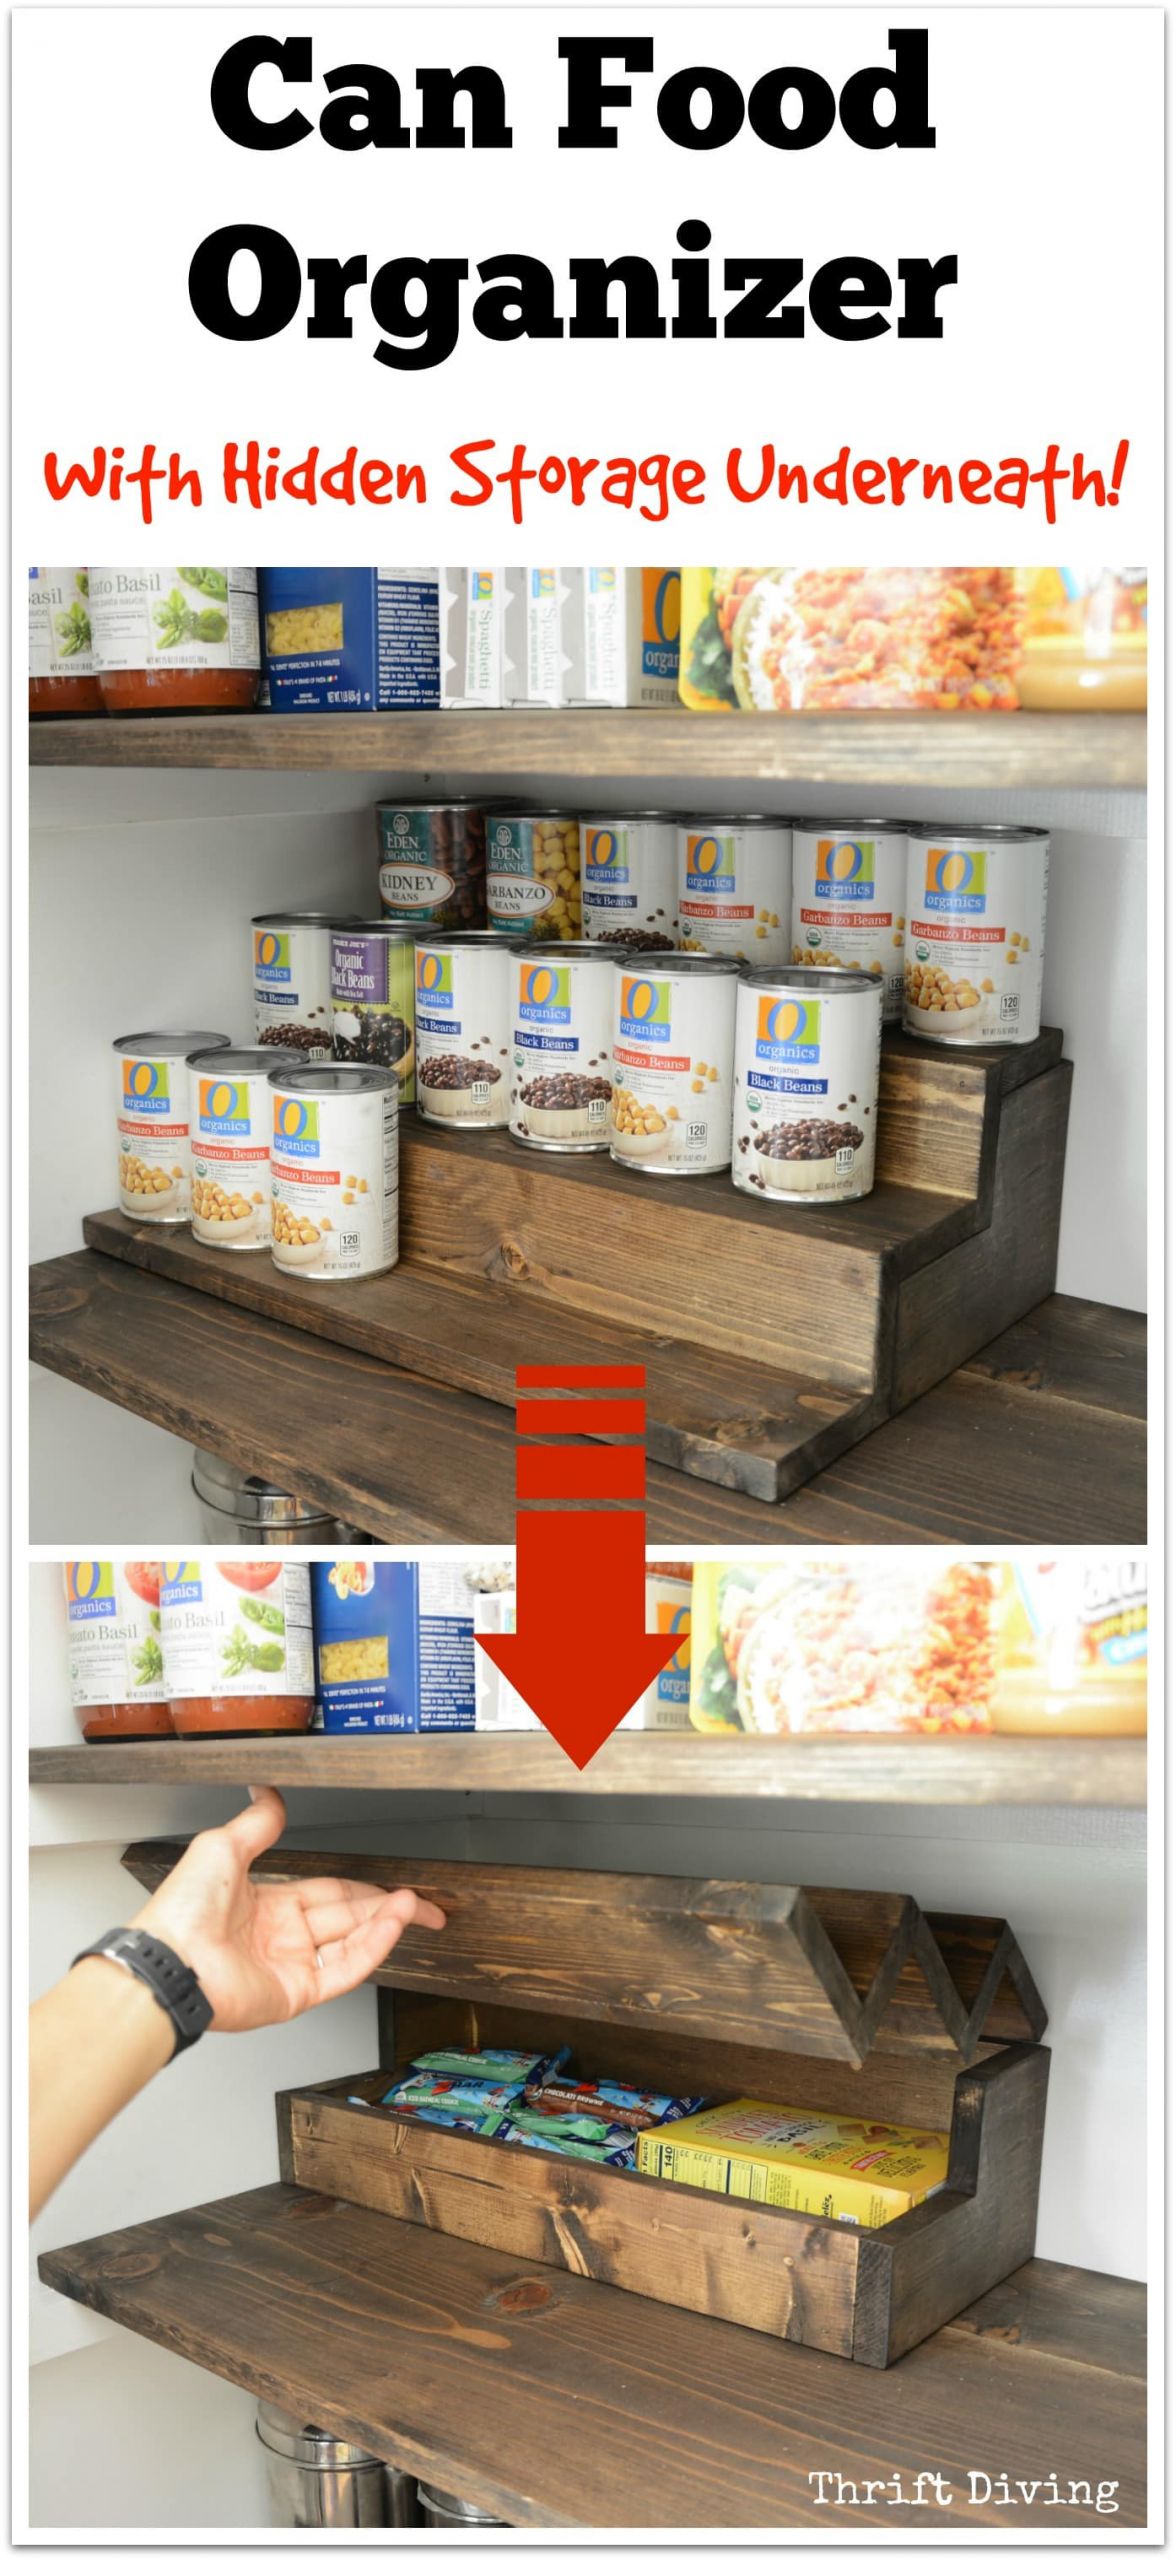 Can Organizer DIY
 Pantry Makeover and Can Food Organizer With Hidden Storage